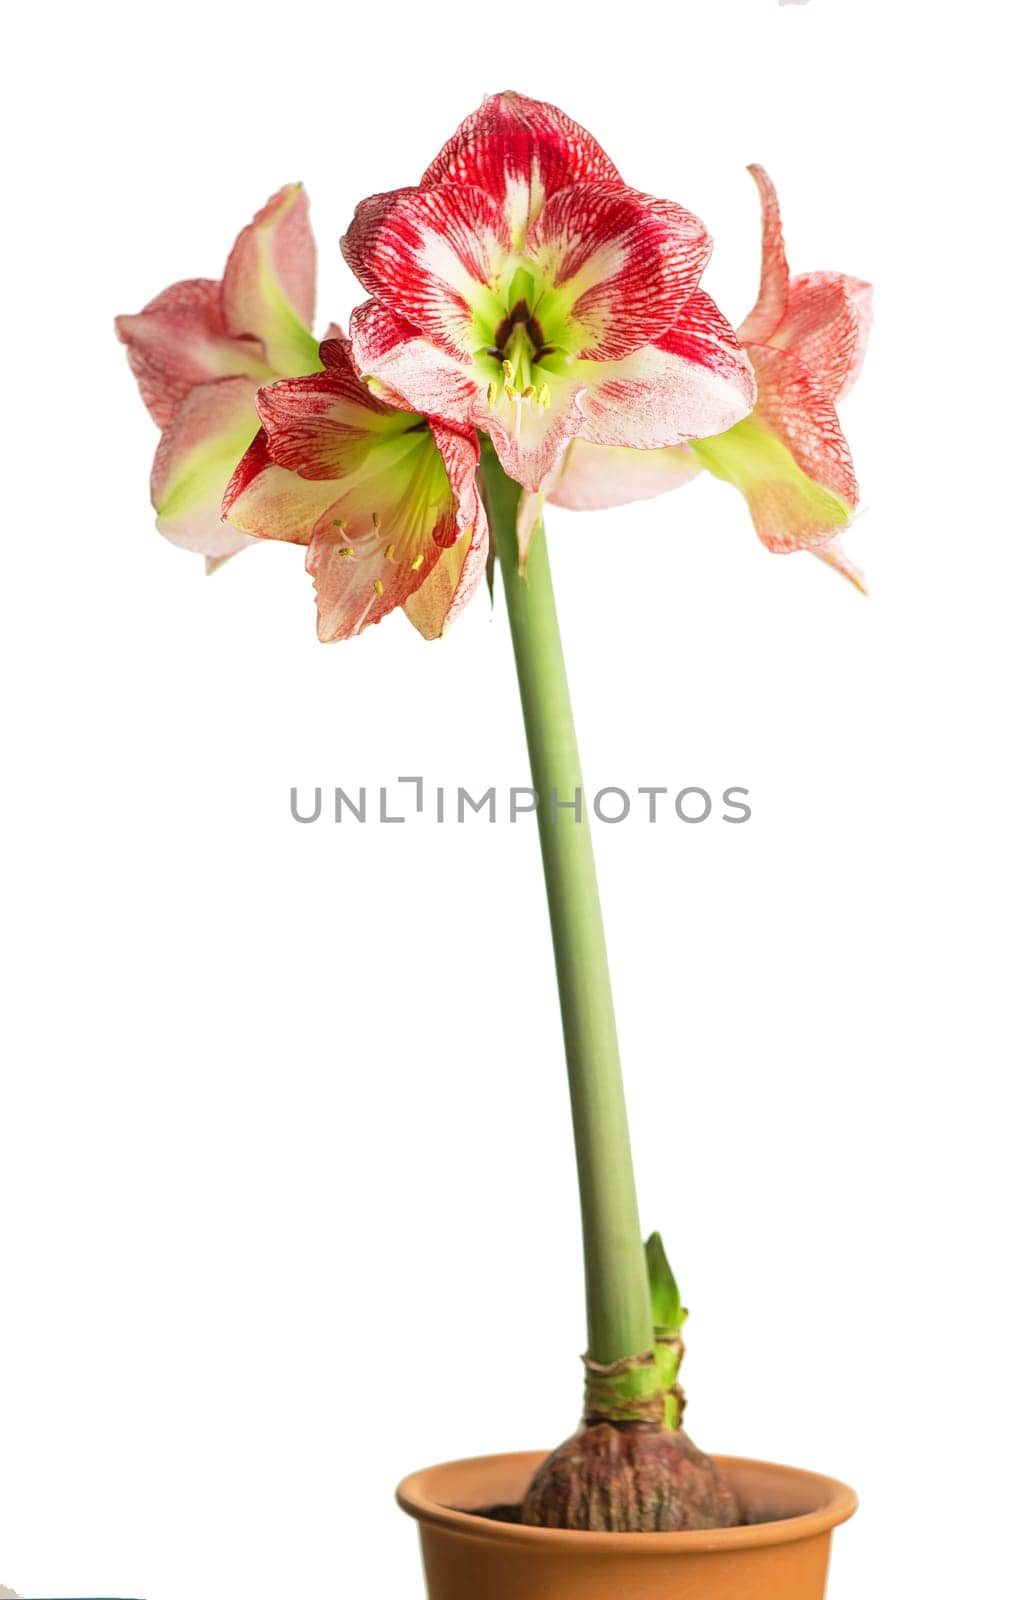 Red amaryllis flower blooming isolated with clipping path on white background,Amaryllis,Hippeastrums flowers by aprilphoto